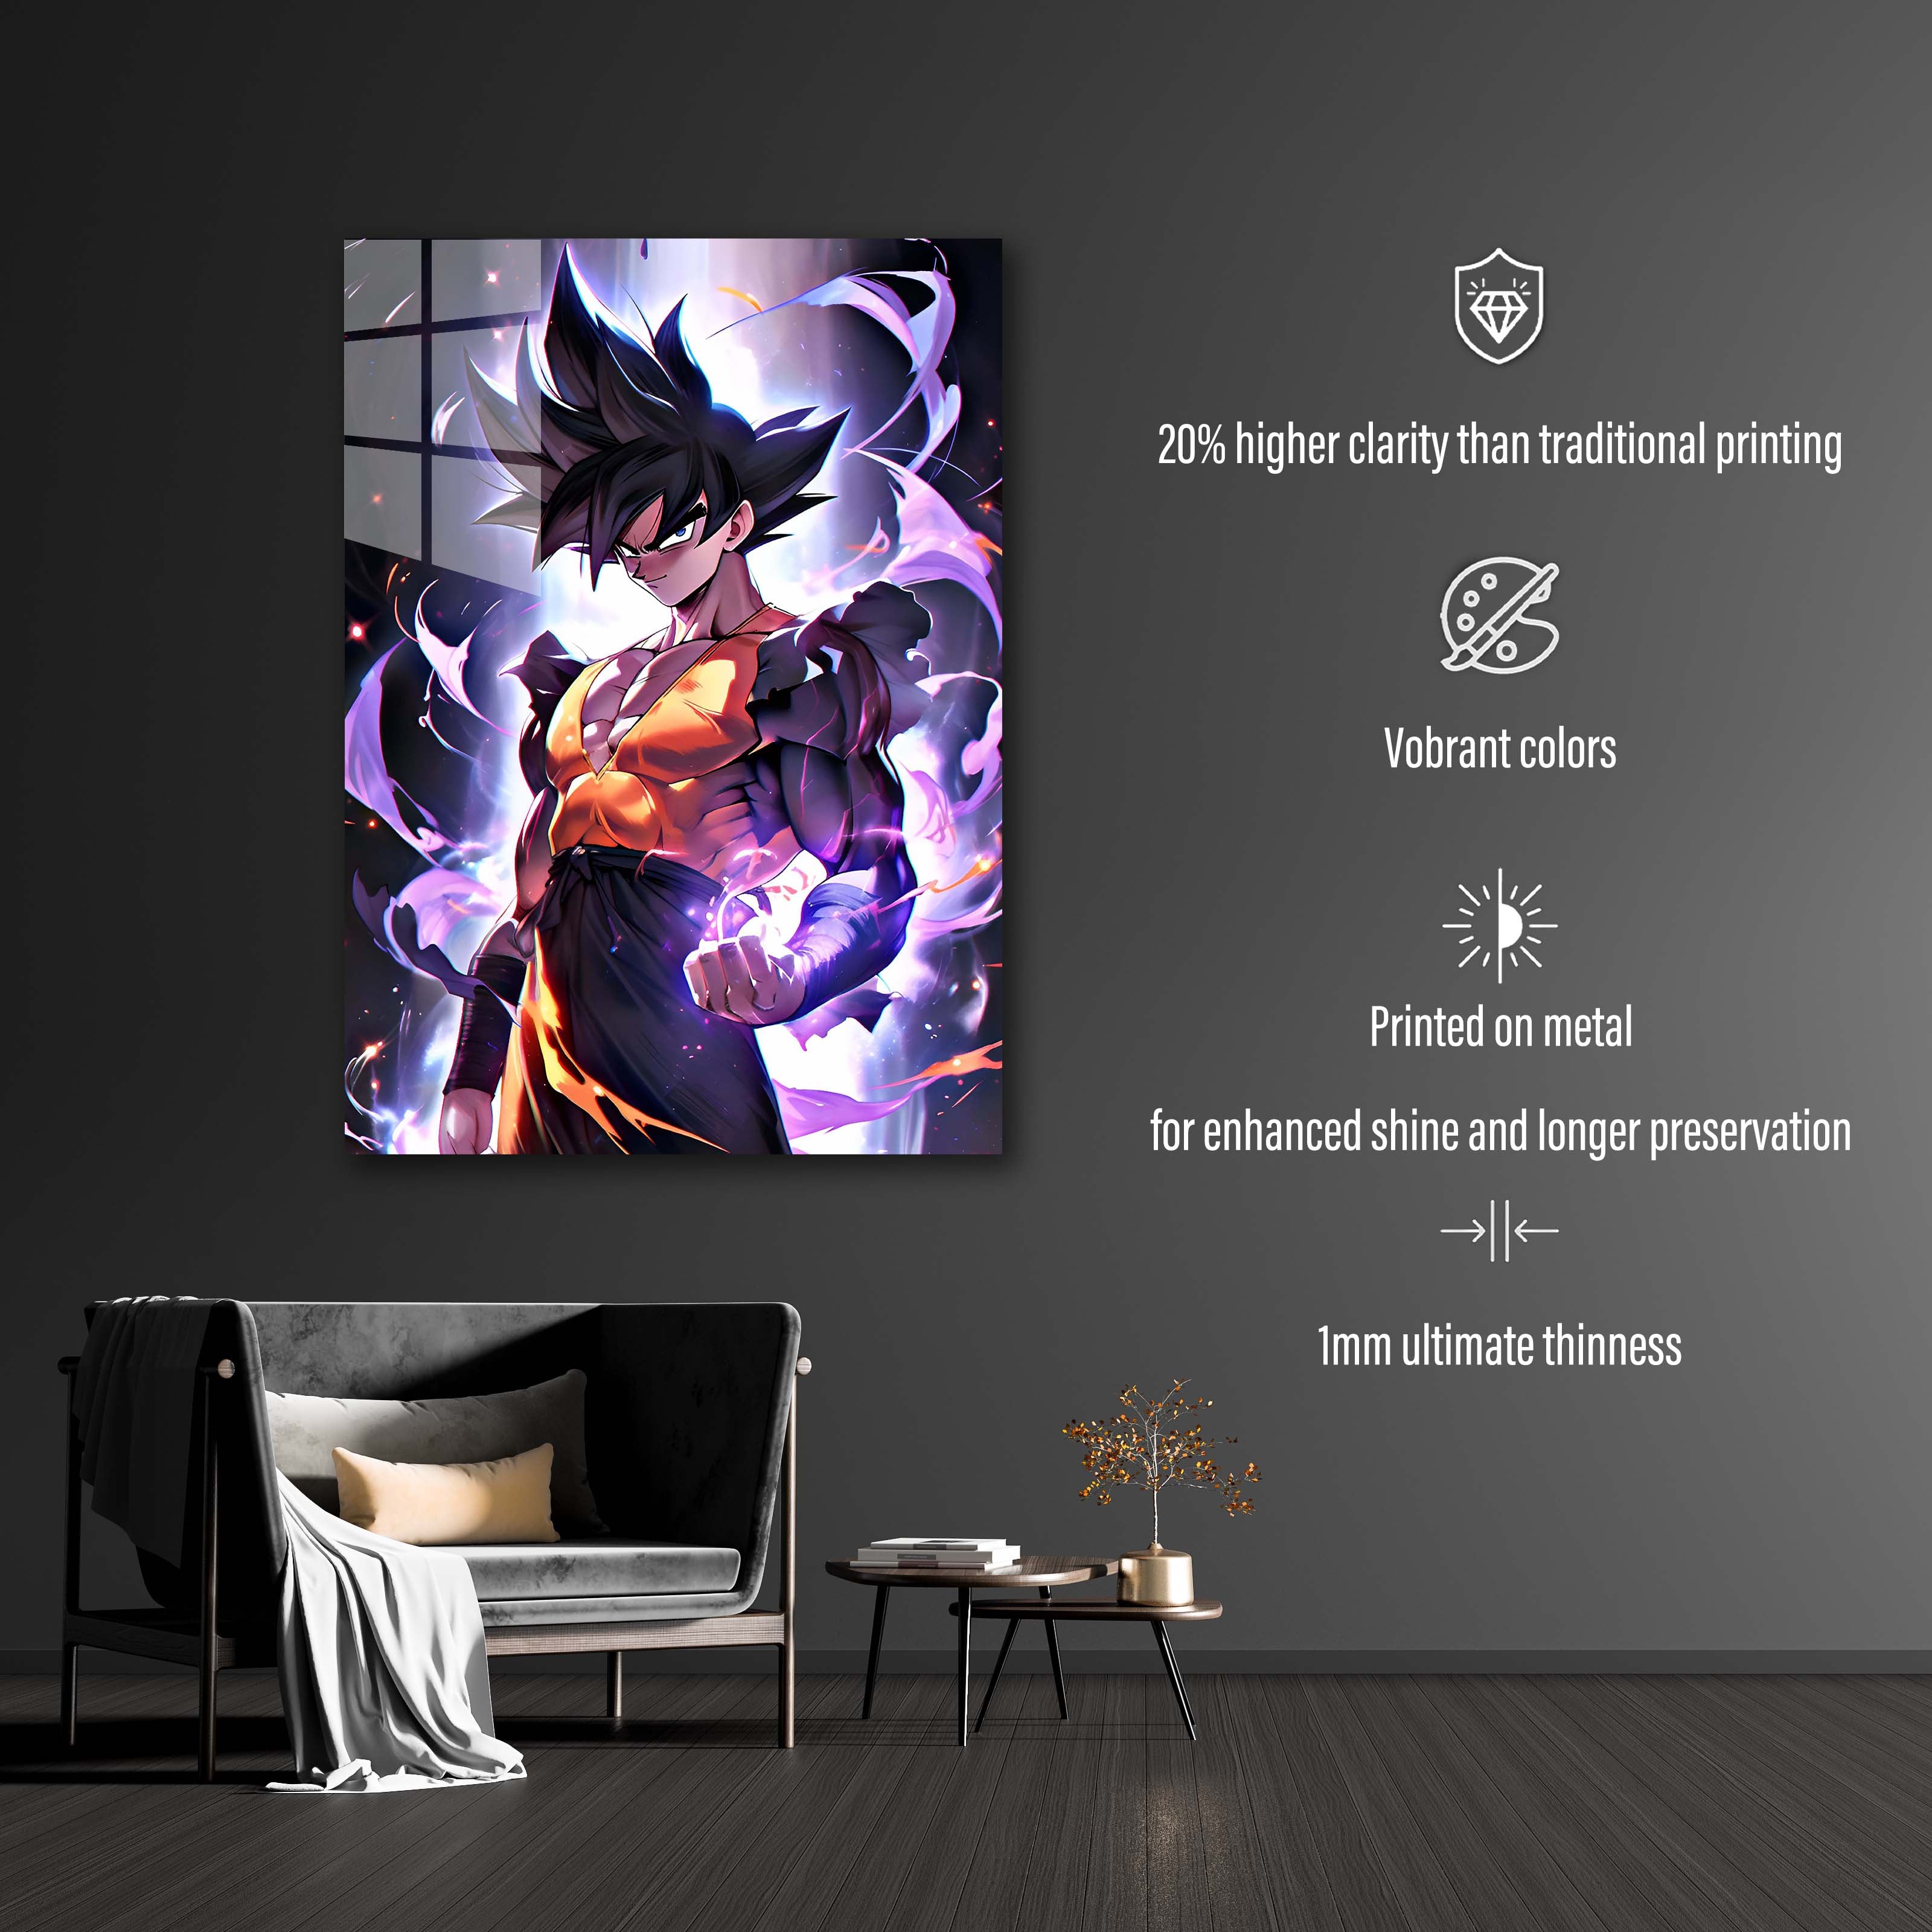 Goku From DBZ Anime -designed by @Vid_M@tion